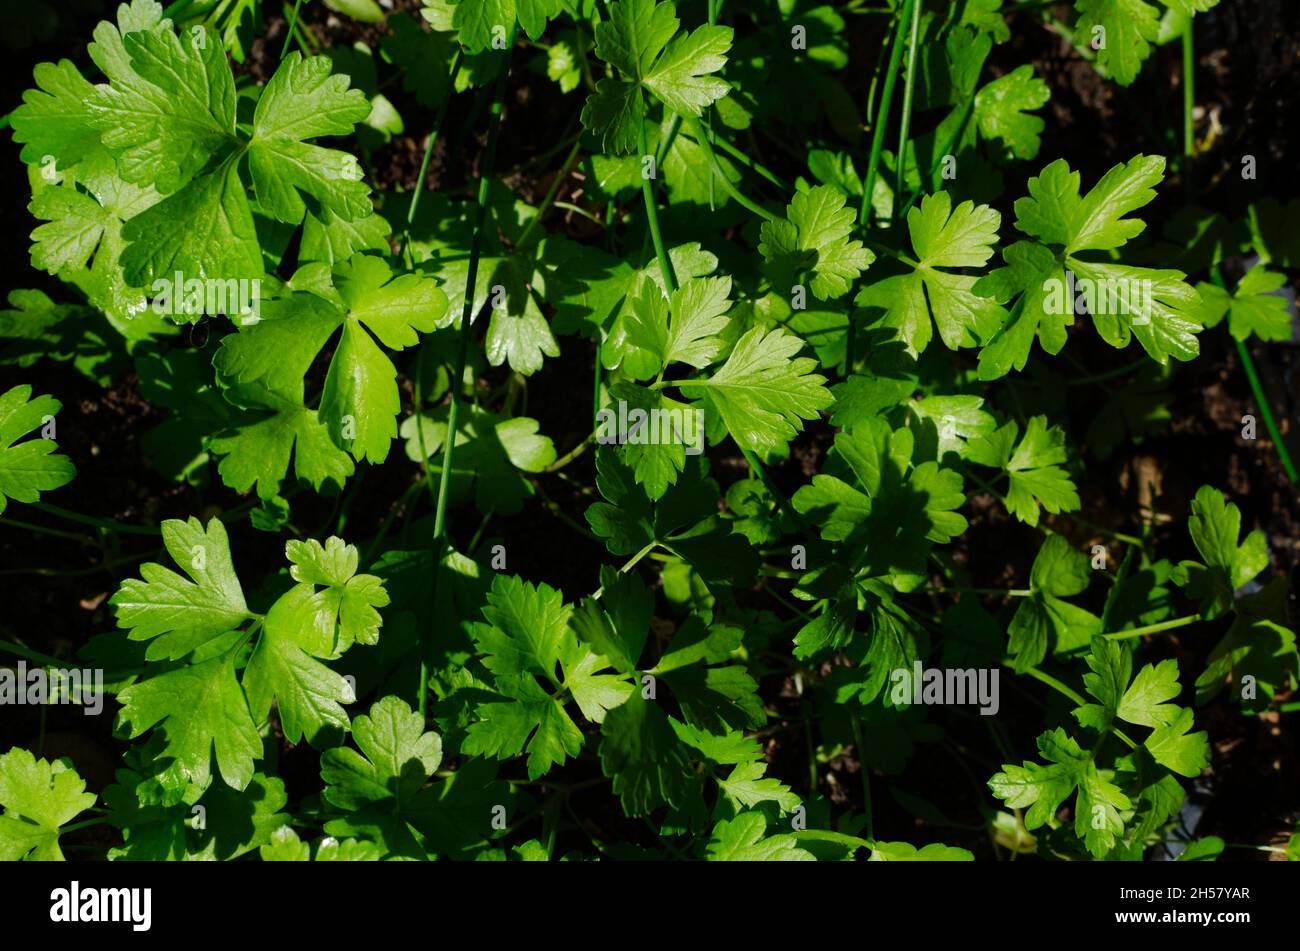 Top view of healthy parsley. Black background. Stock Photo